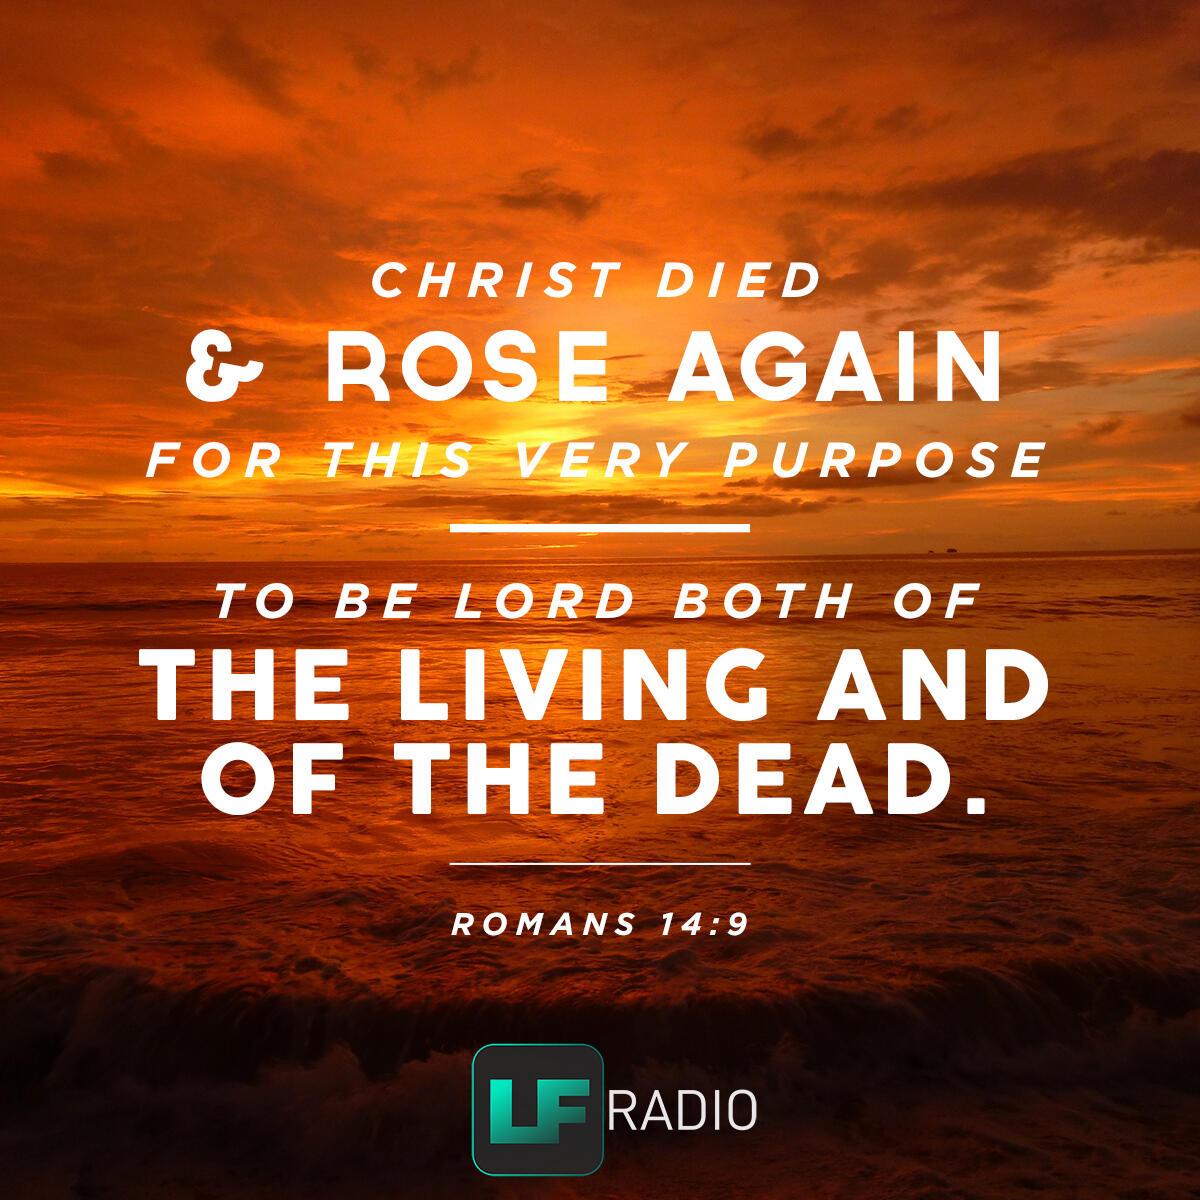 Romans 14:9 - Verse of the Day